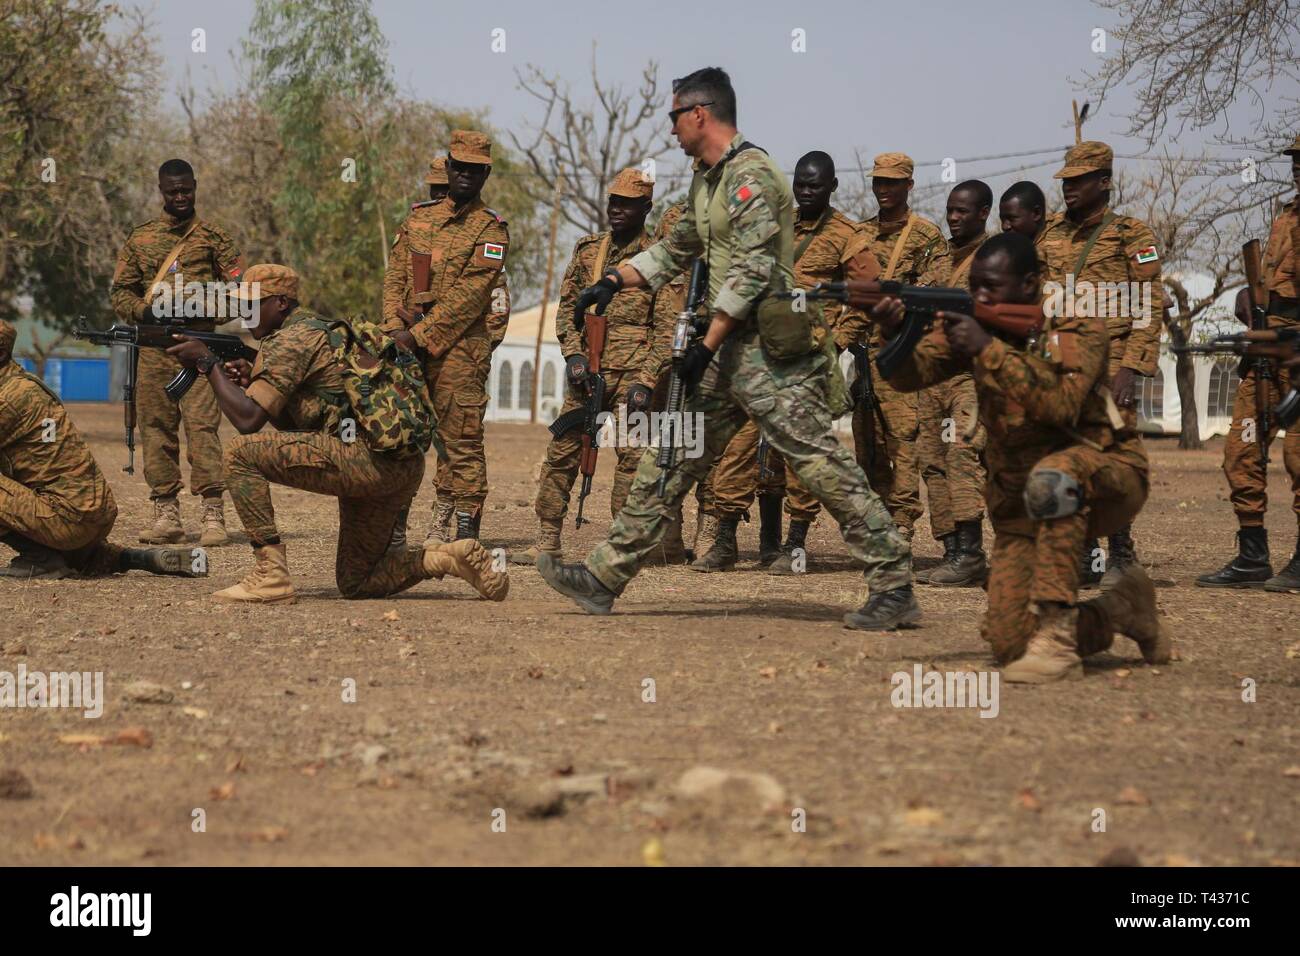 A Portuguese Special Forces soldiers coaches Burkina Faso soldiers during a battle movement training lane on base camp Loumbila, in Burkina Faso on Feb. 21, 2019. The training event enhances the Burkinabe forces abilities to defend, fight, and protect the countries national interest and populace. Stock Photo